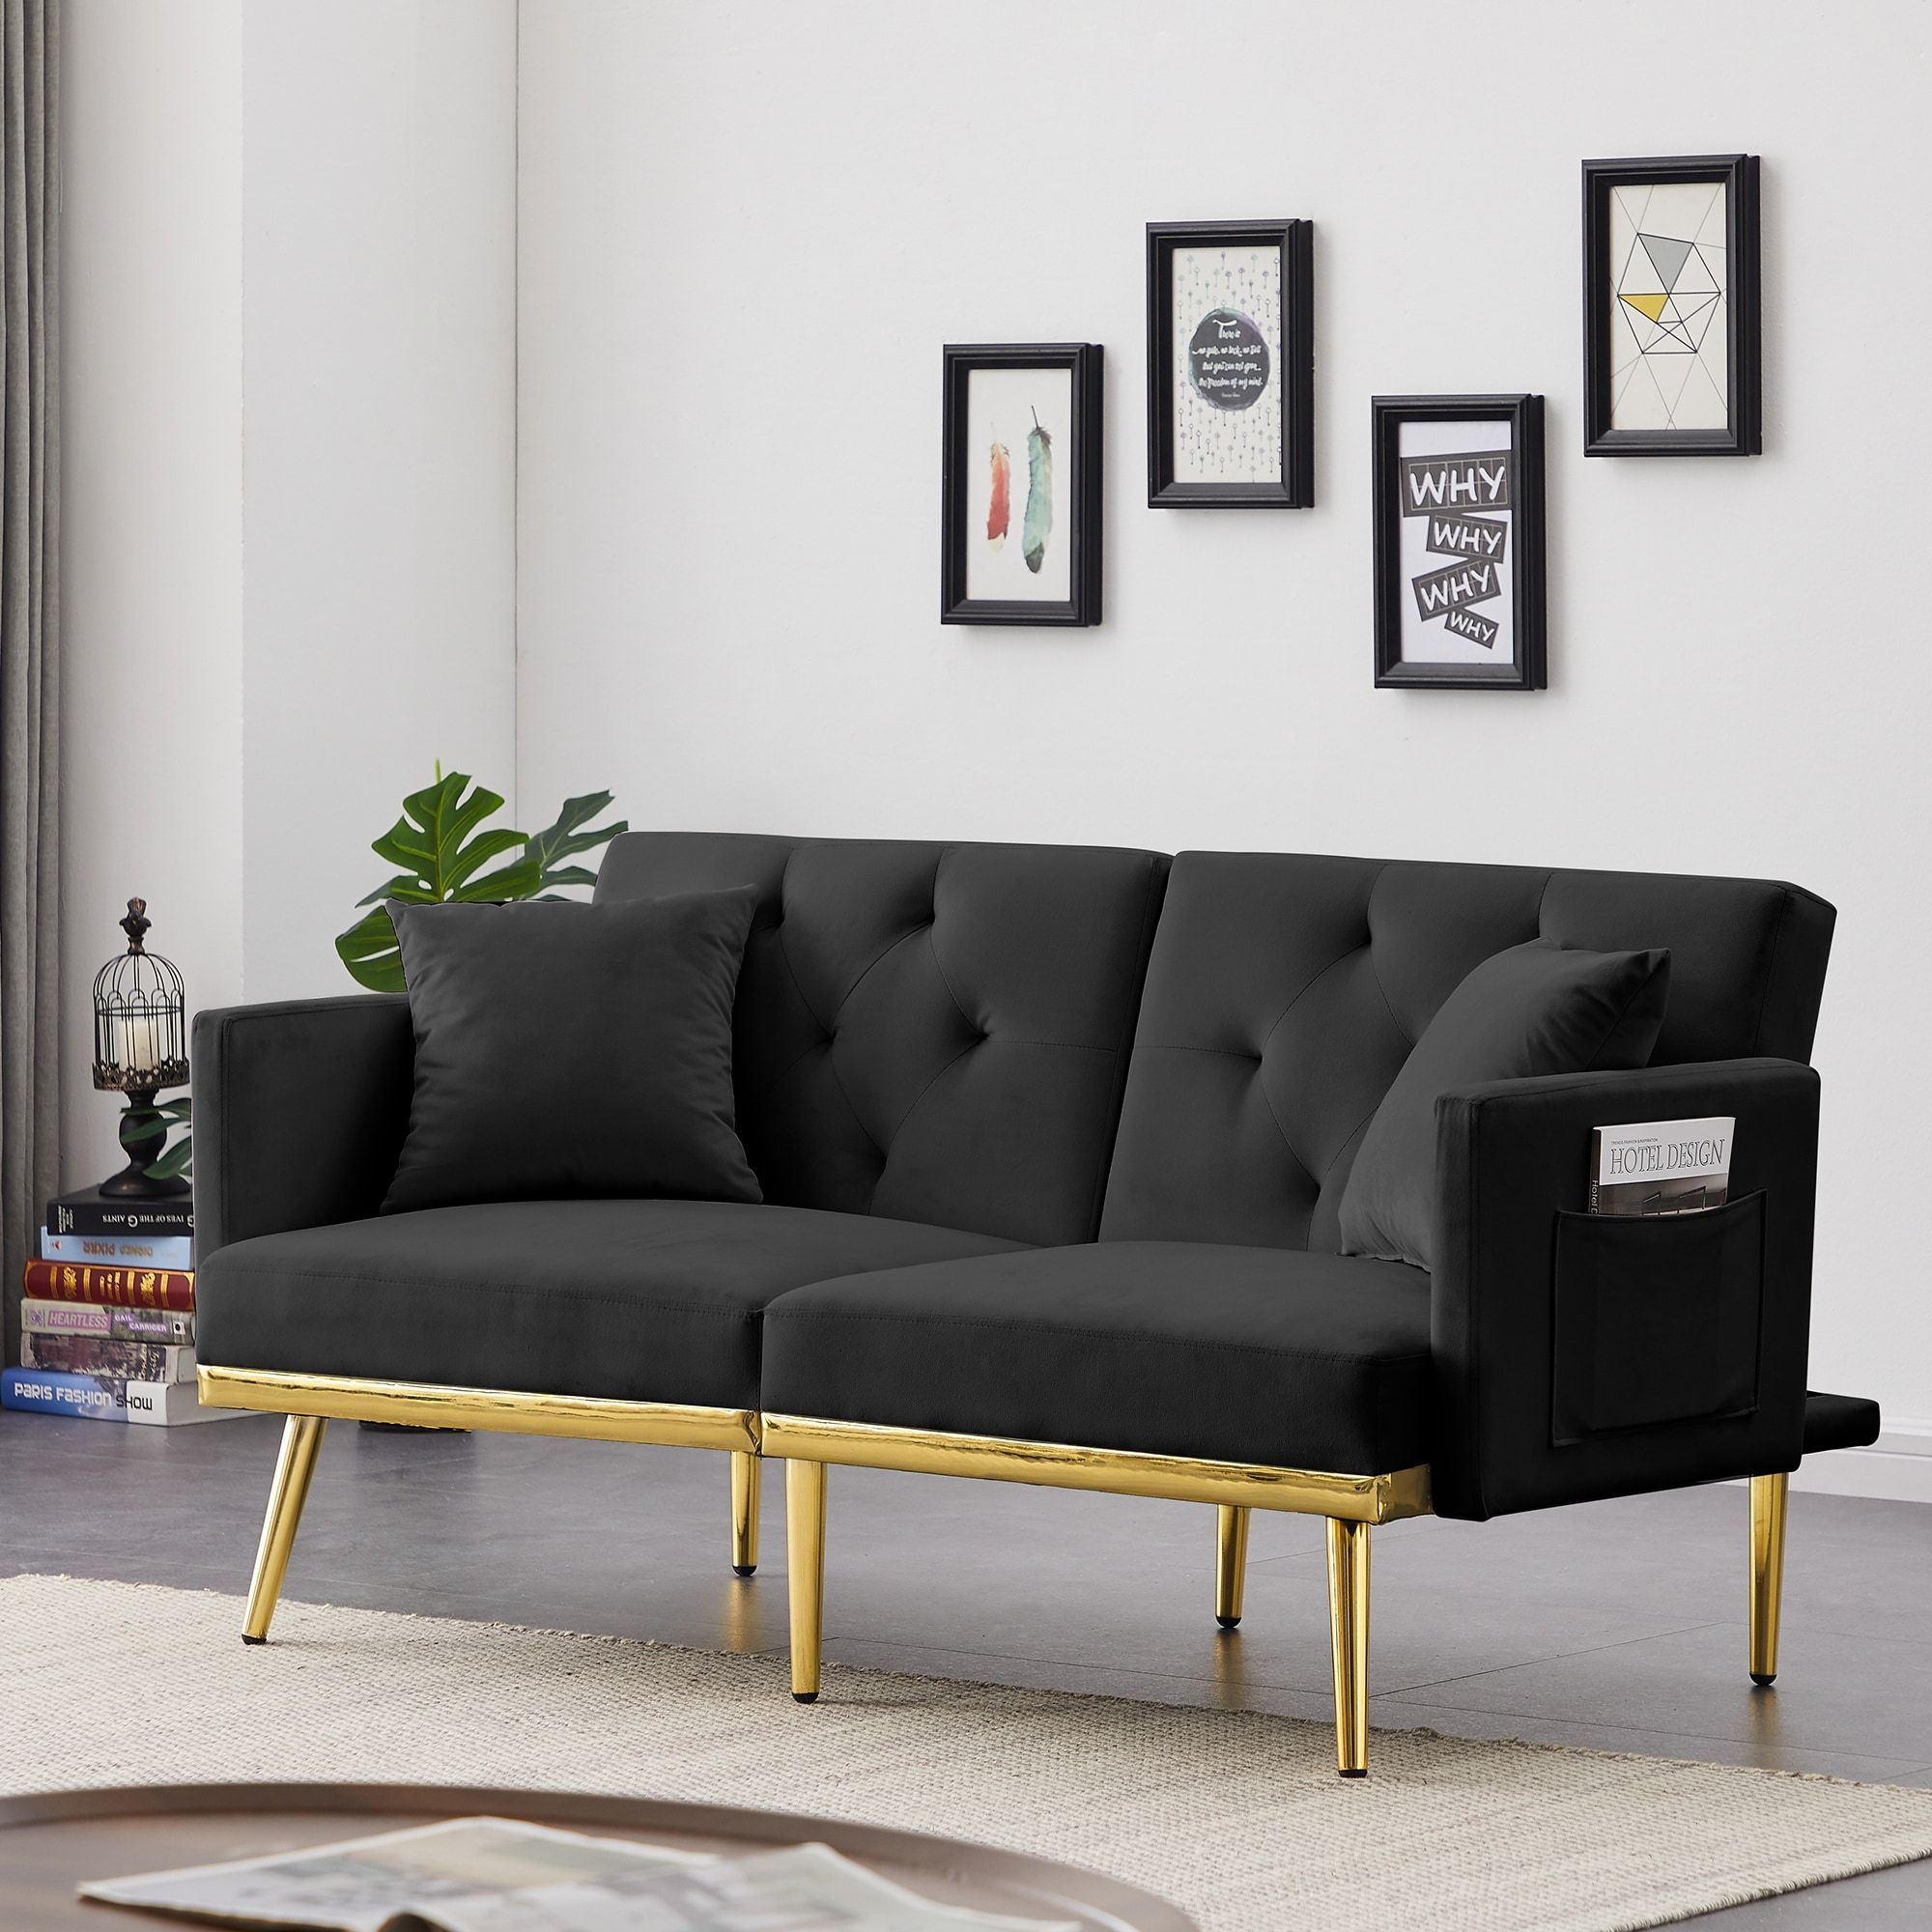 Velvet Futon Sofa Bed Convertible Folding Lounge Couch For Apartment Dorm,  Modern Loveseat With Armrest, Gold Metal Legs – Bed Bath & Beyond – 36687086 Throughout Black Velvet 2 Seater Sofa Beds (View 14 of 15)